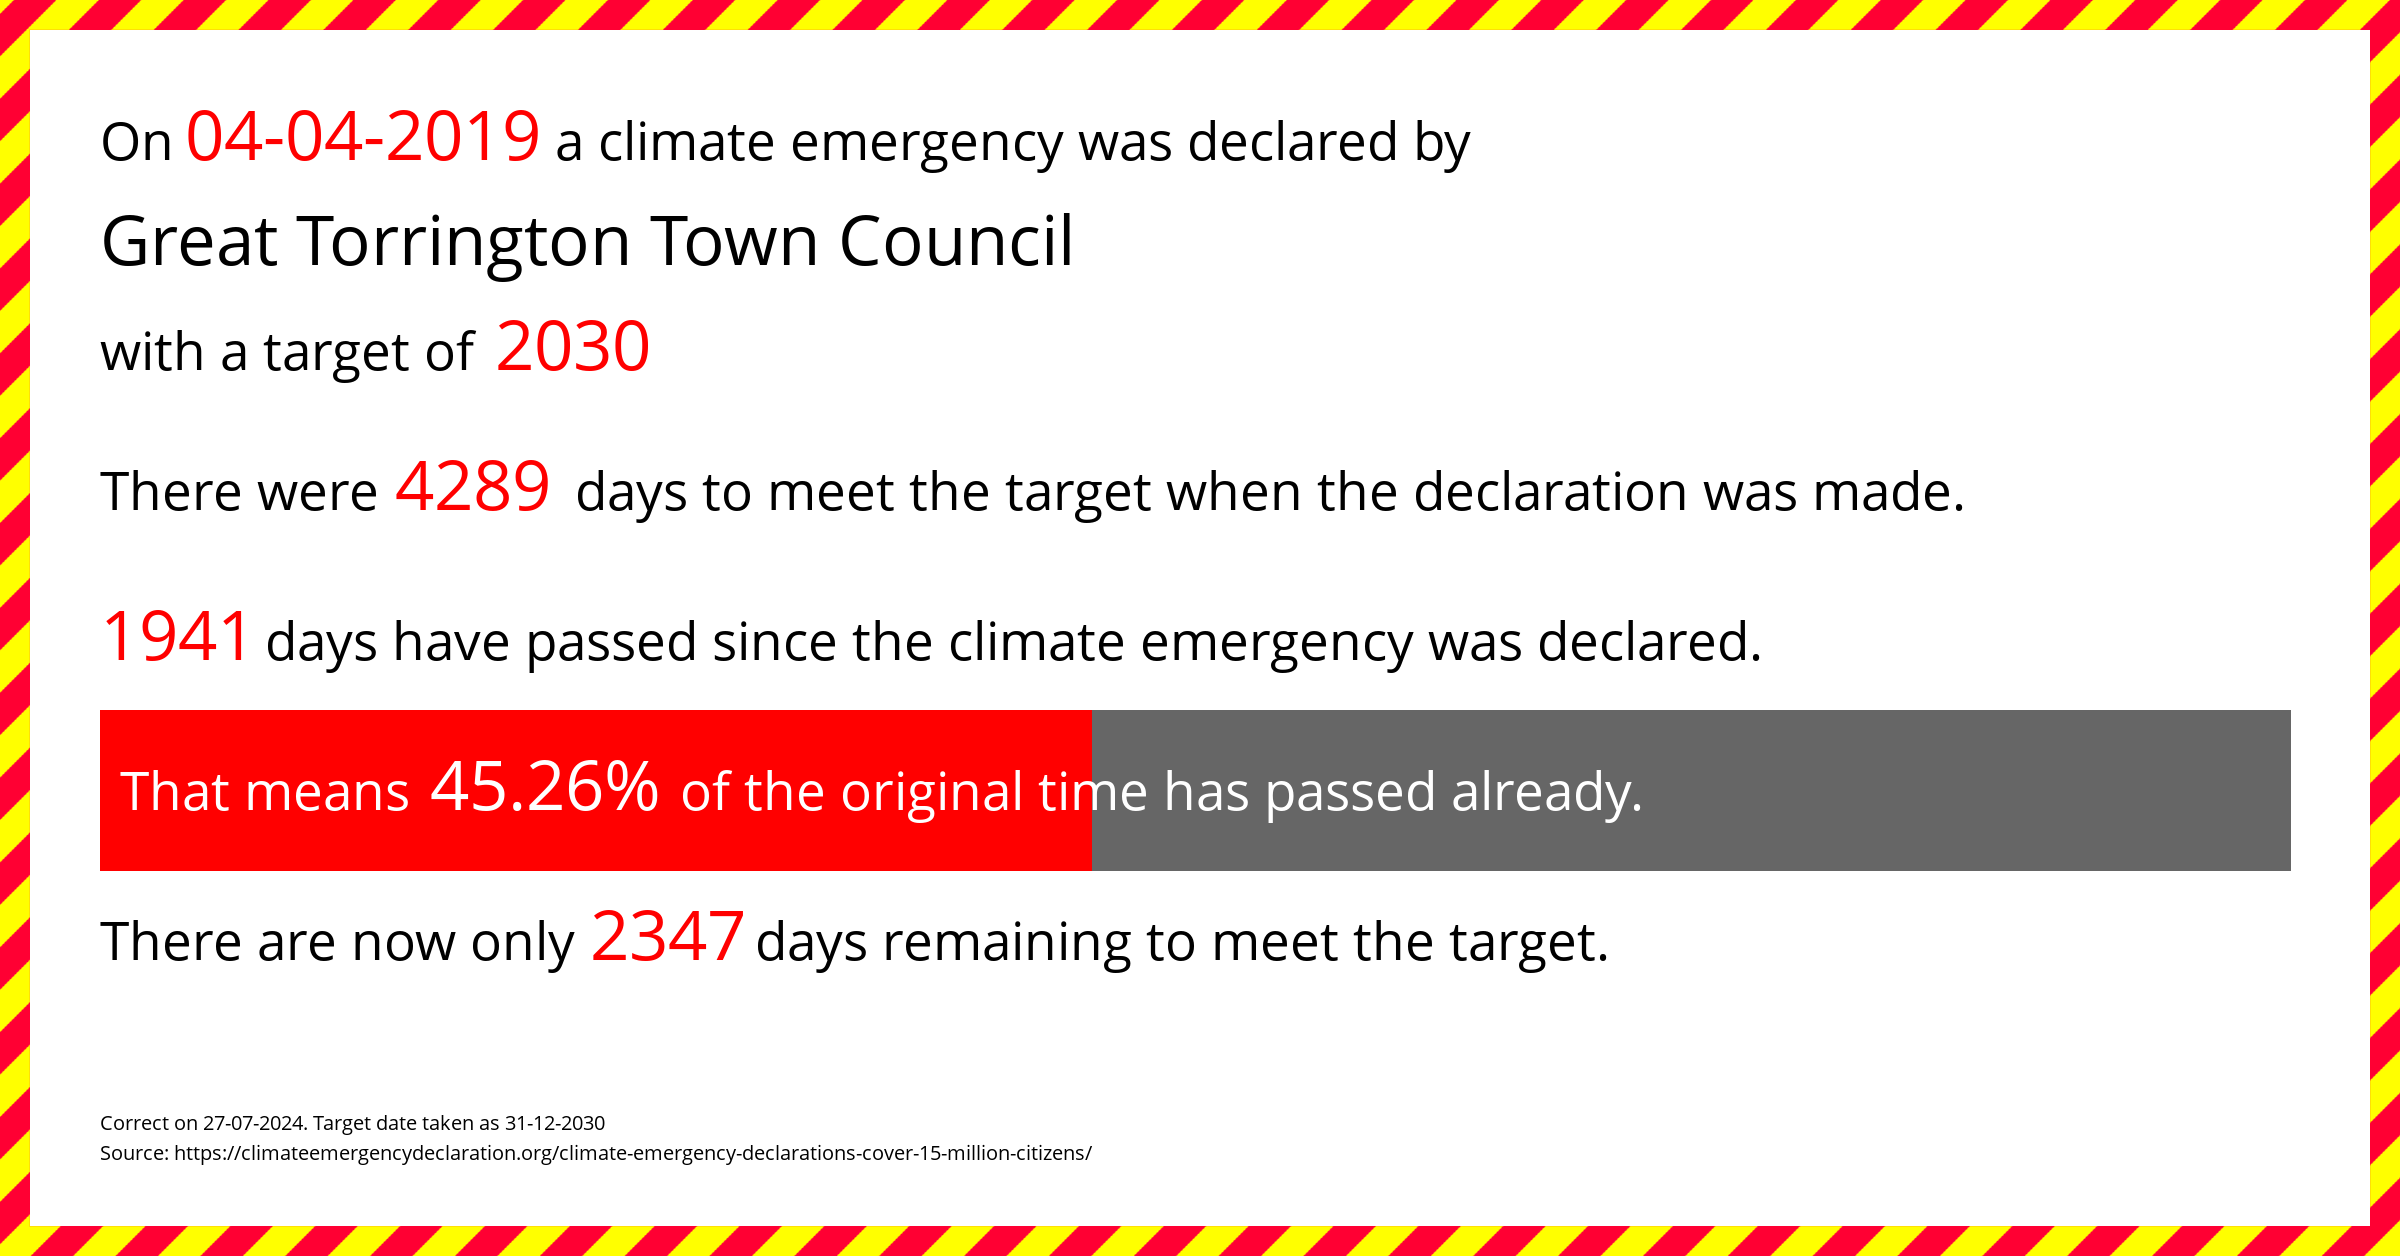 Great Torrington Town Council declared a Climate emergency on Thursday 4th April 2019, with a target of 2030.